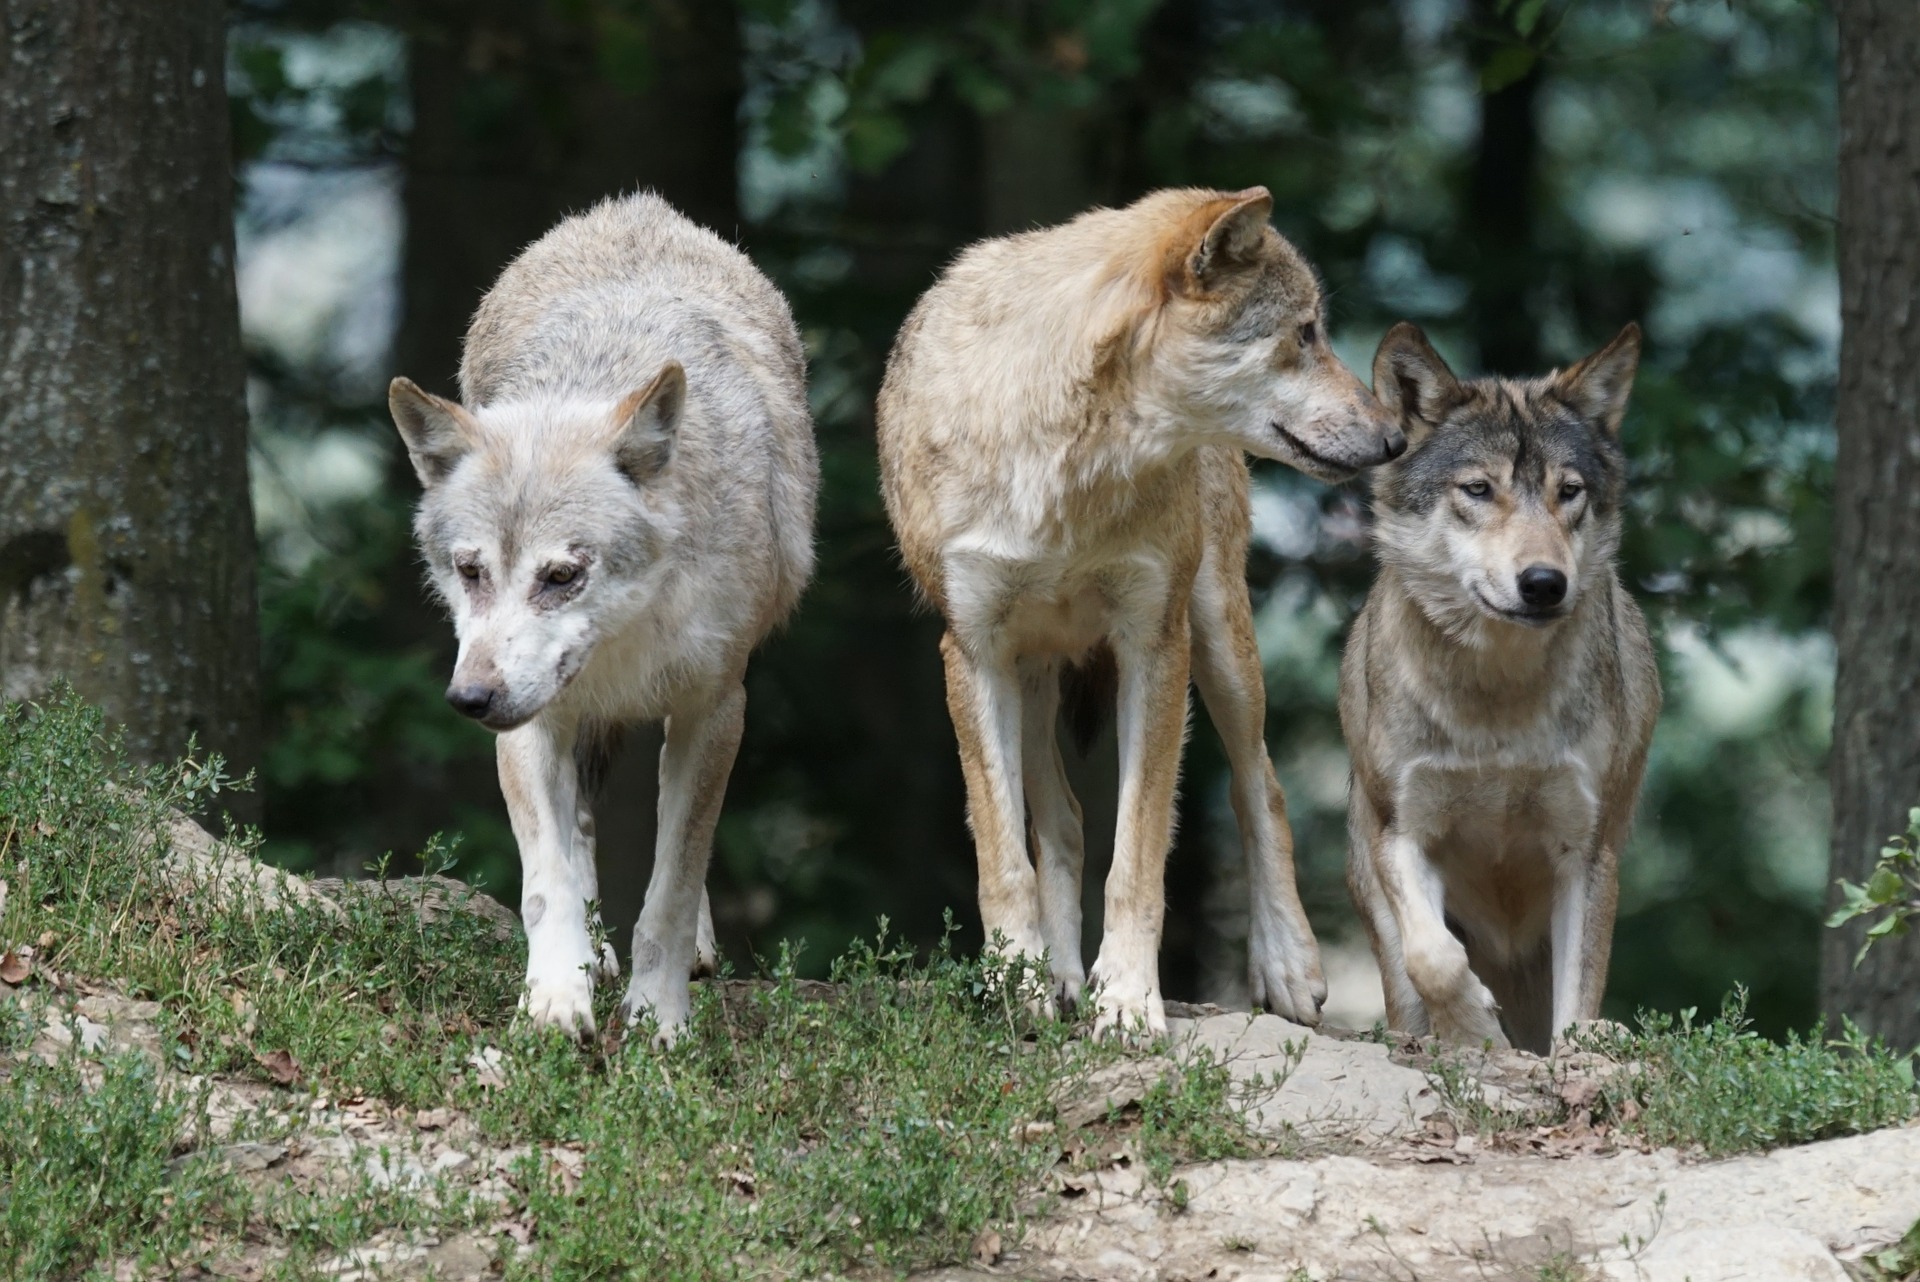 timber-wolves-907680_1920 (1)